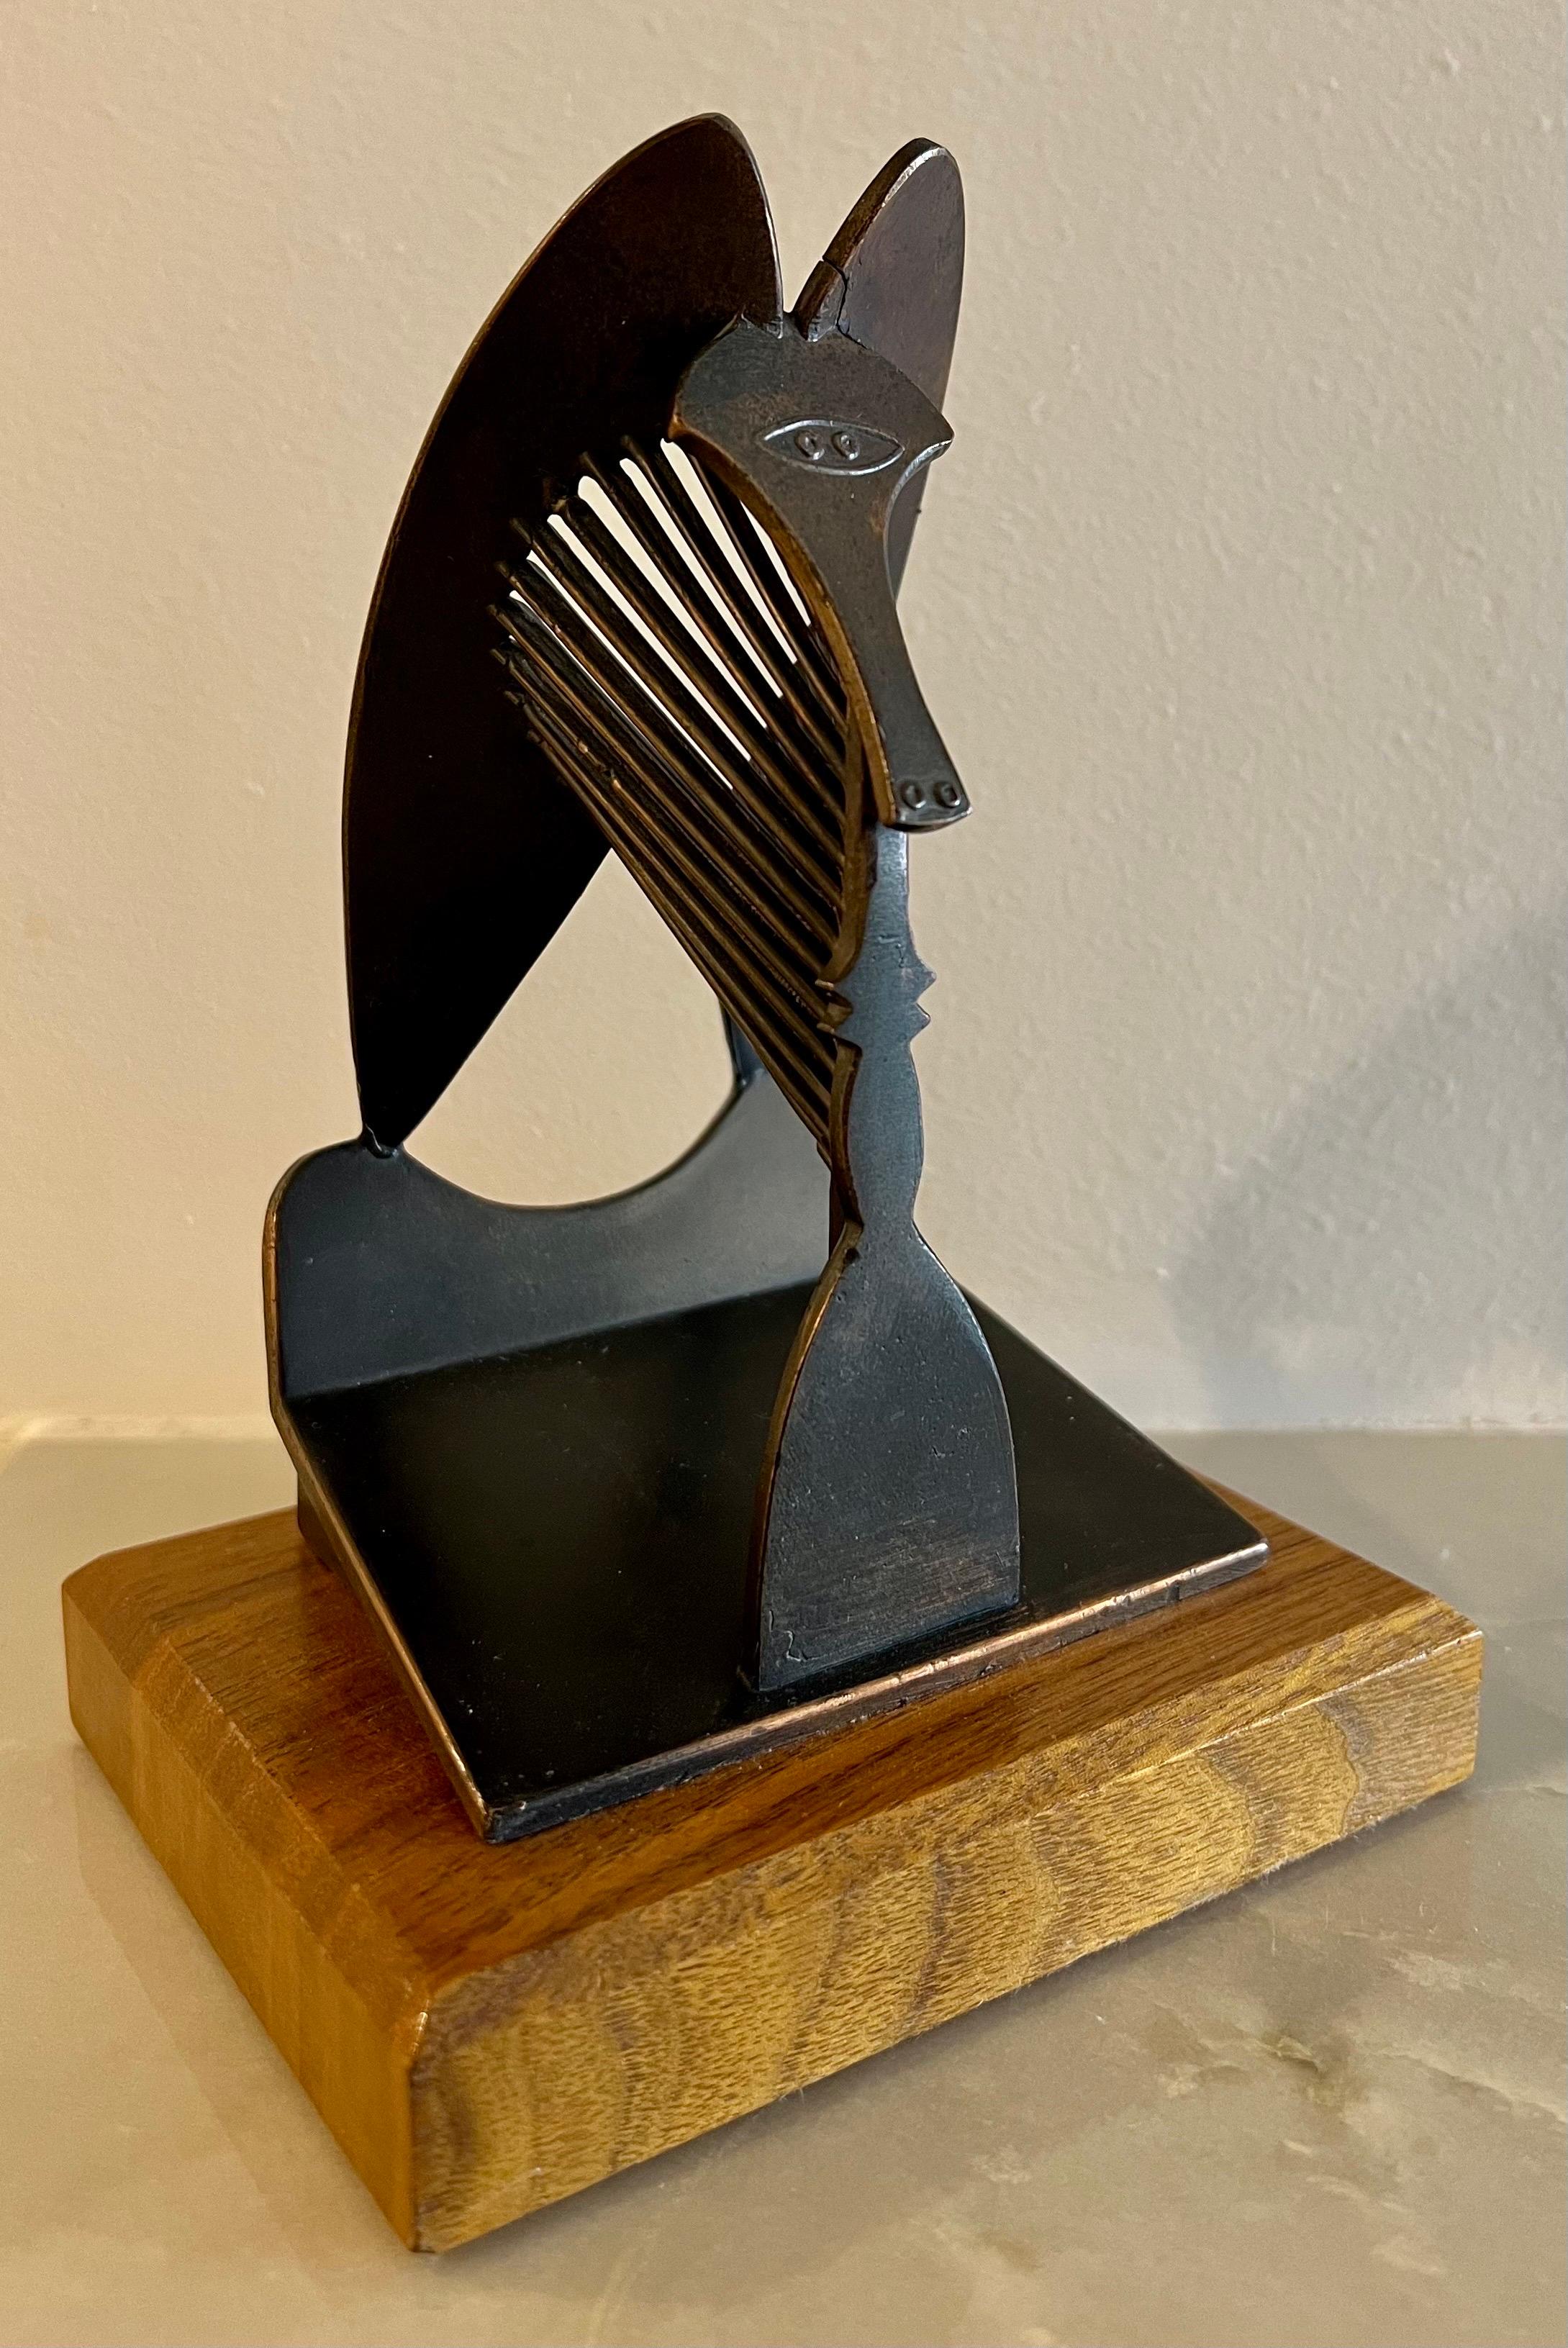 This is a model of the large Picasso sculpture in Chicago it is a vintage piece from 1967 and was made for the Chicago Public Building Commission (I believe by the Chicago replica co.)
there is a bronze colored mottled patina to the piece. Mounted